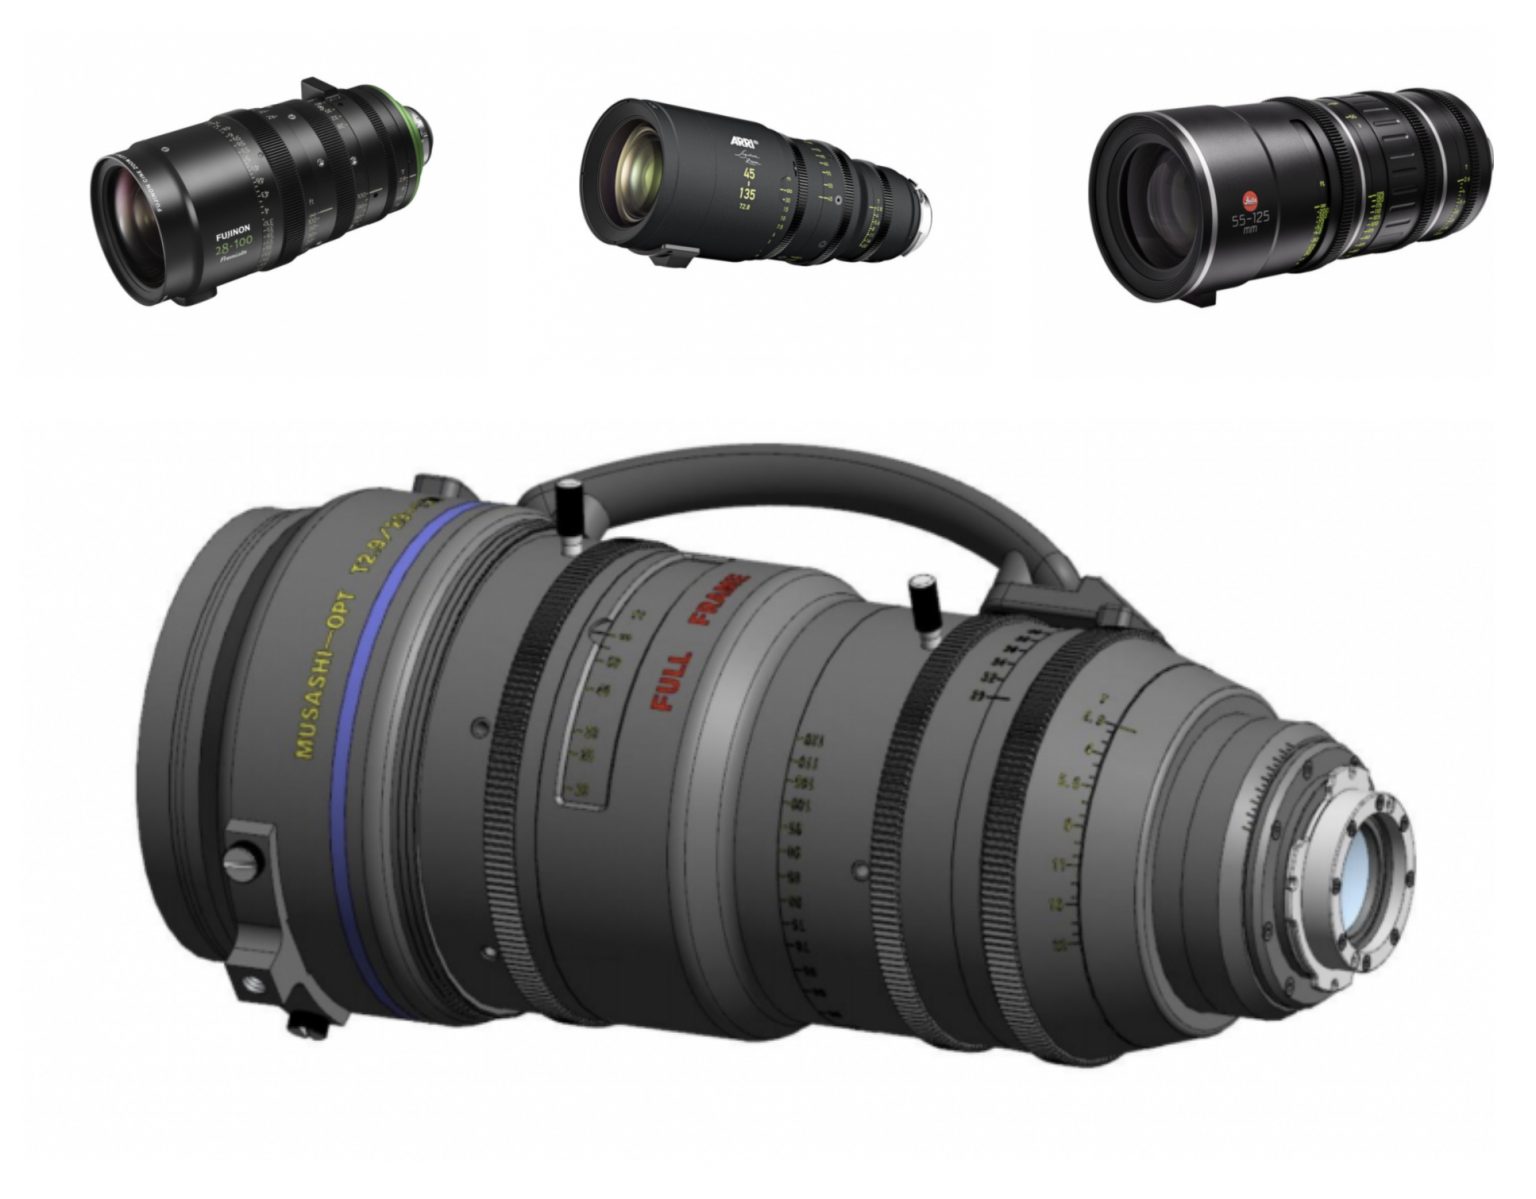 Angenieux Full Frame Optimo Compact Zooms - Newsshooter